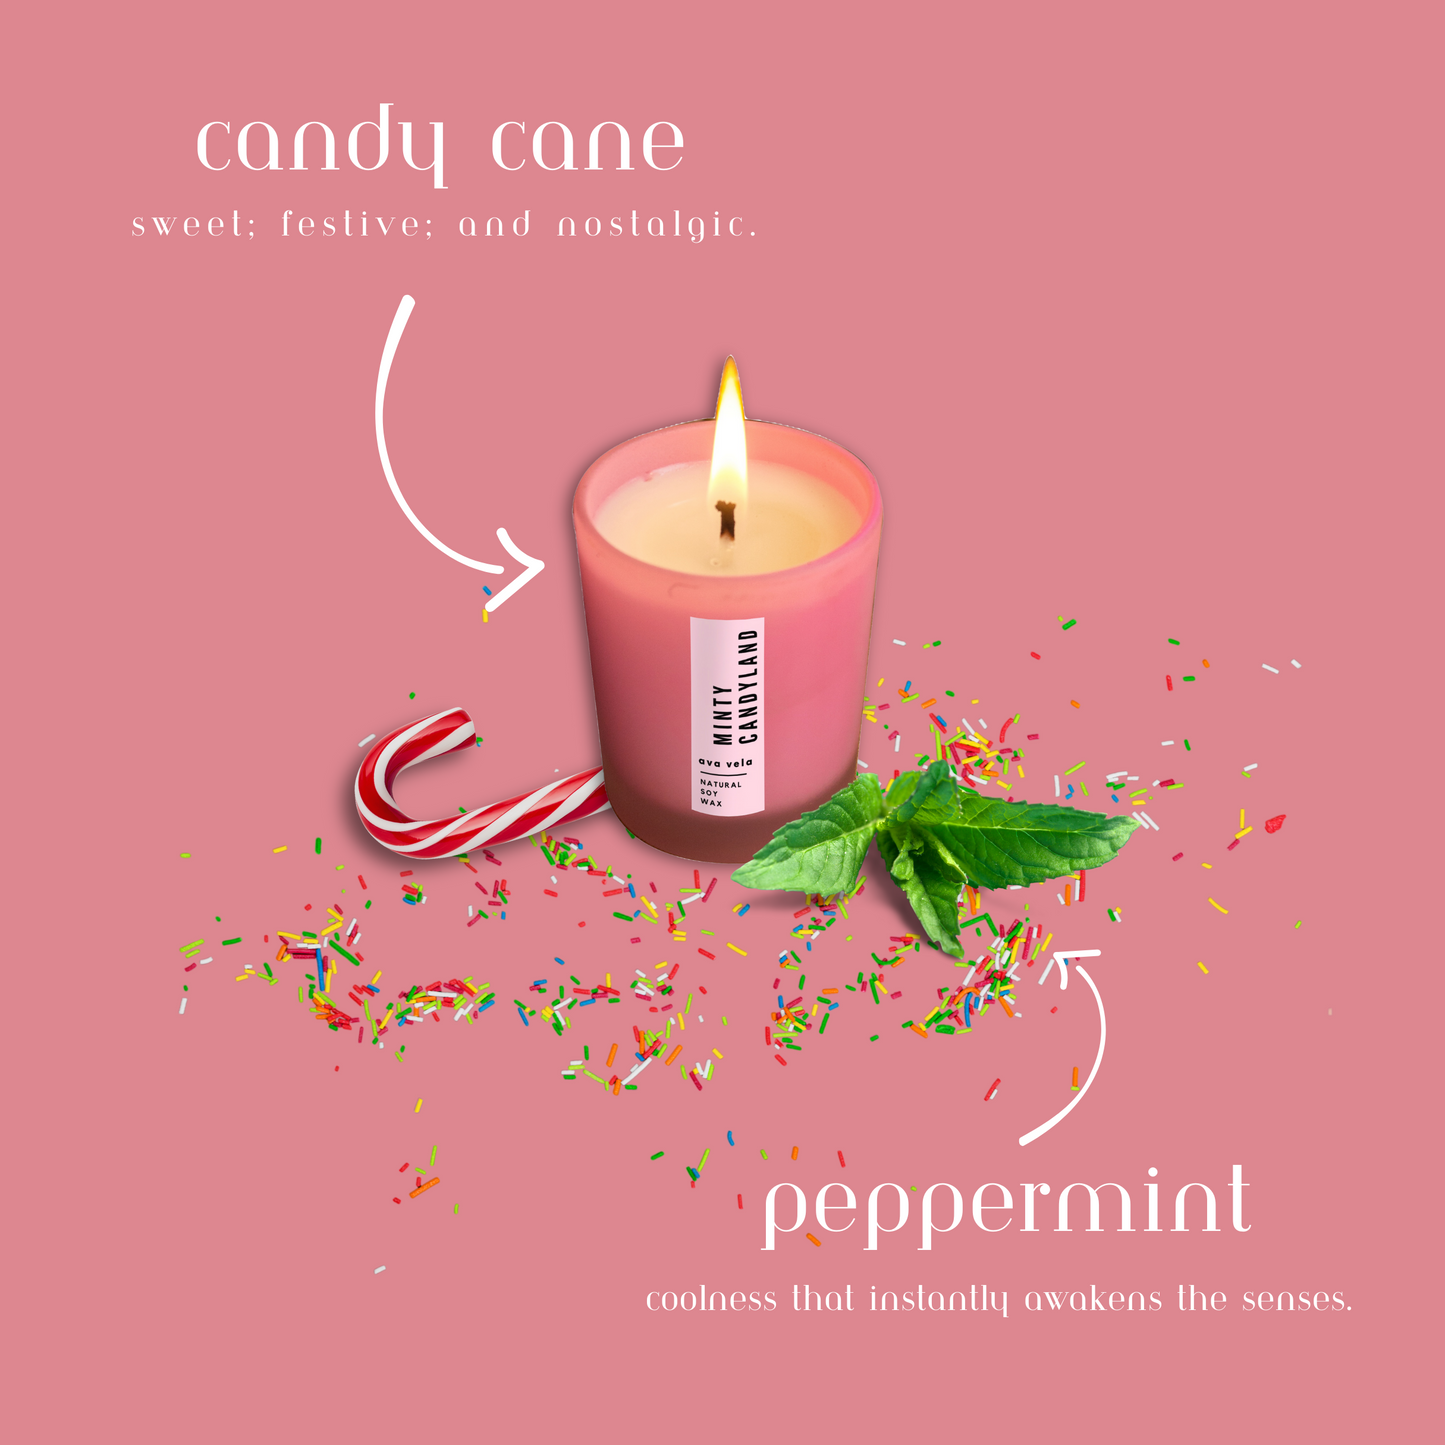 Minty Candy Cane  - Shot Jar Soy Wax Scented Candle 12 hours Burn Time